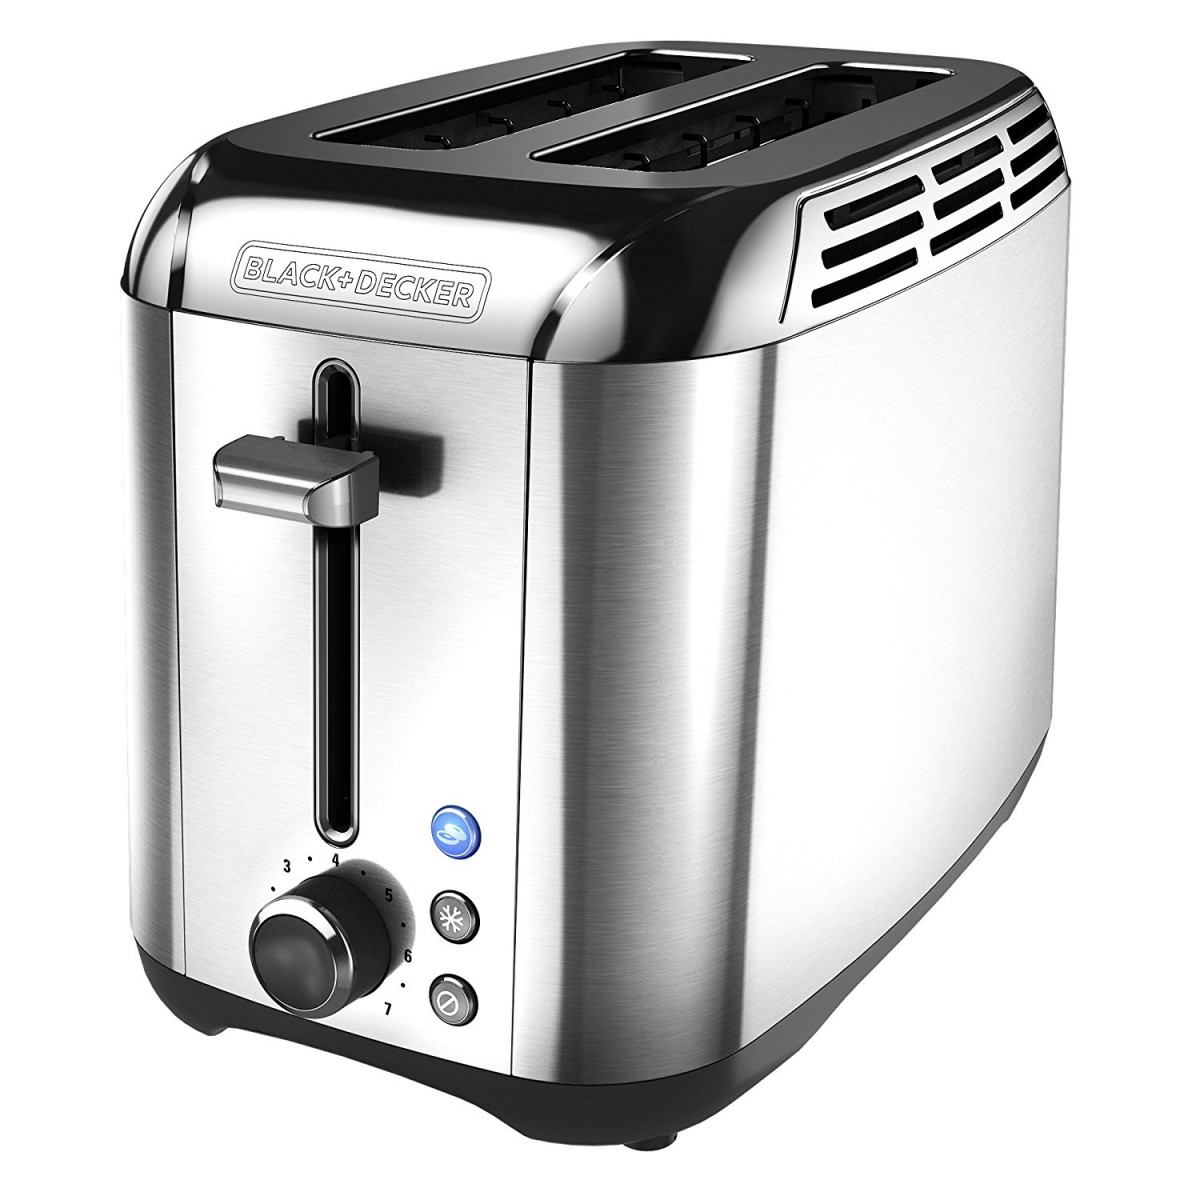 Is this £500 toaster the best thing since sliced bread?